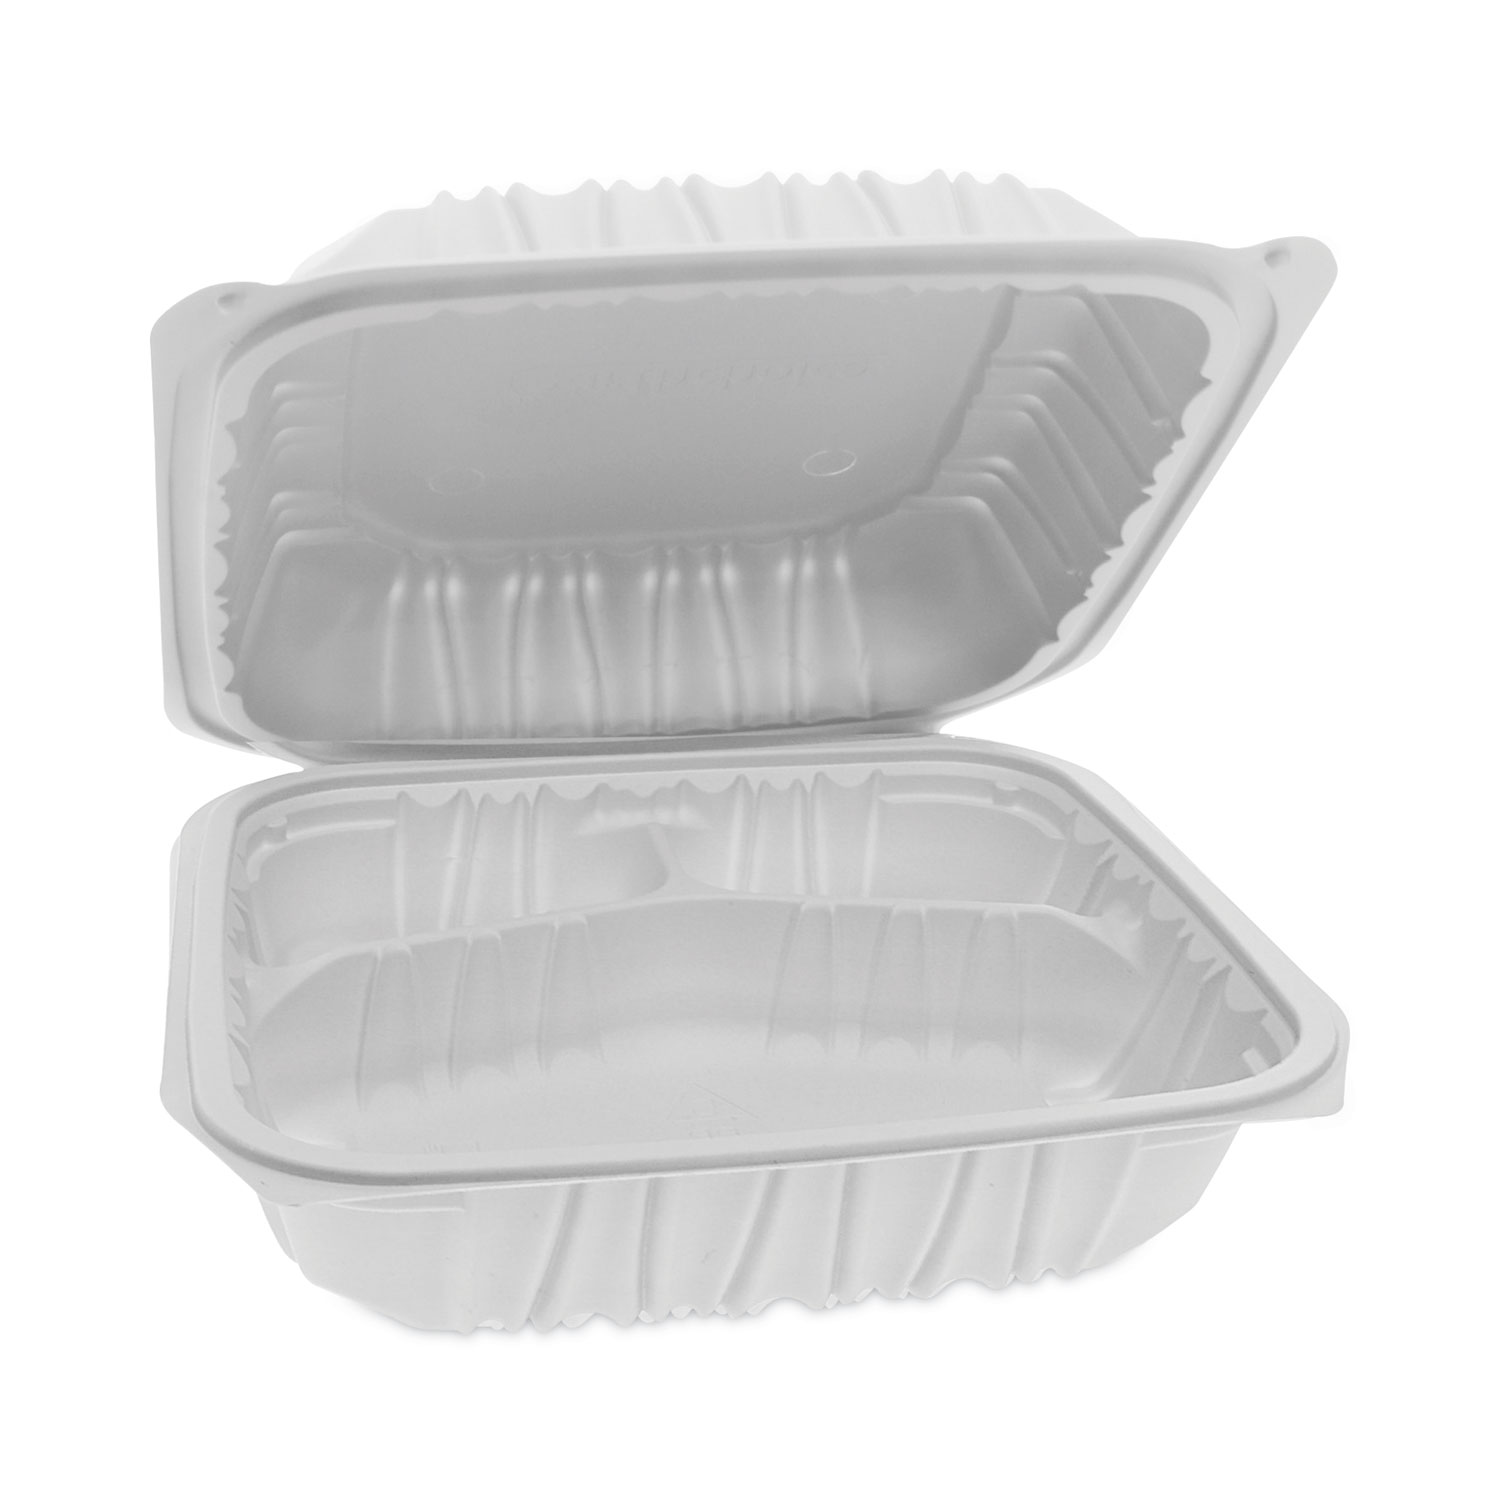 Vented Microwavable Hinged-Lid Takeout Container, 8.5 x 8.5 x 3.1, White, 146-carton